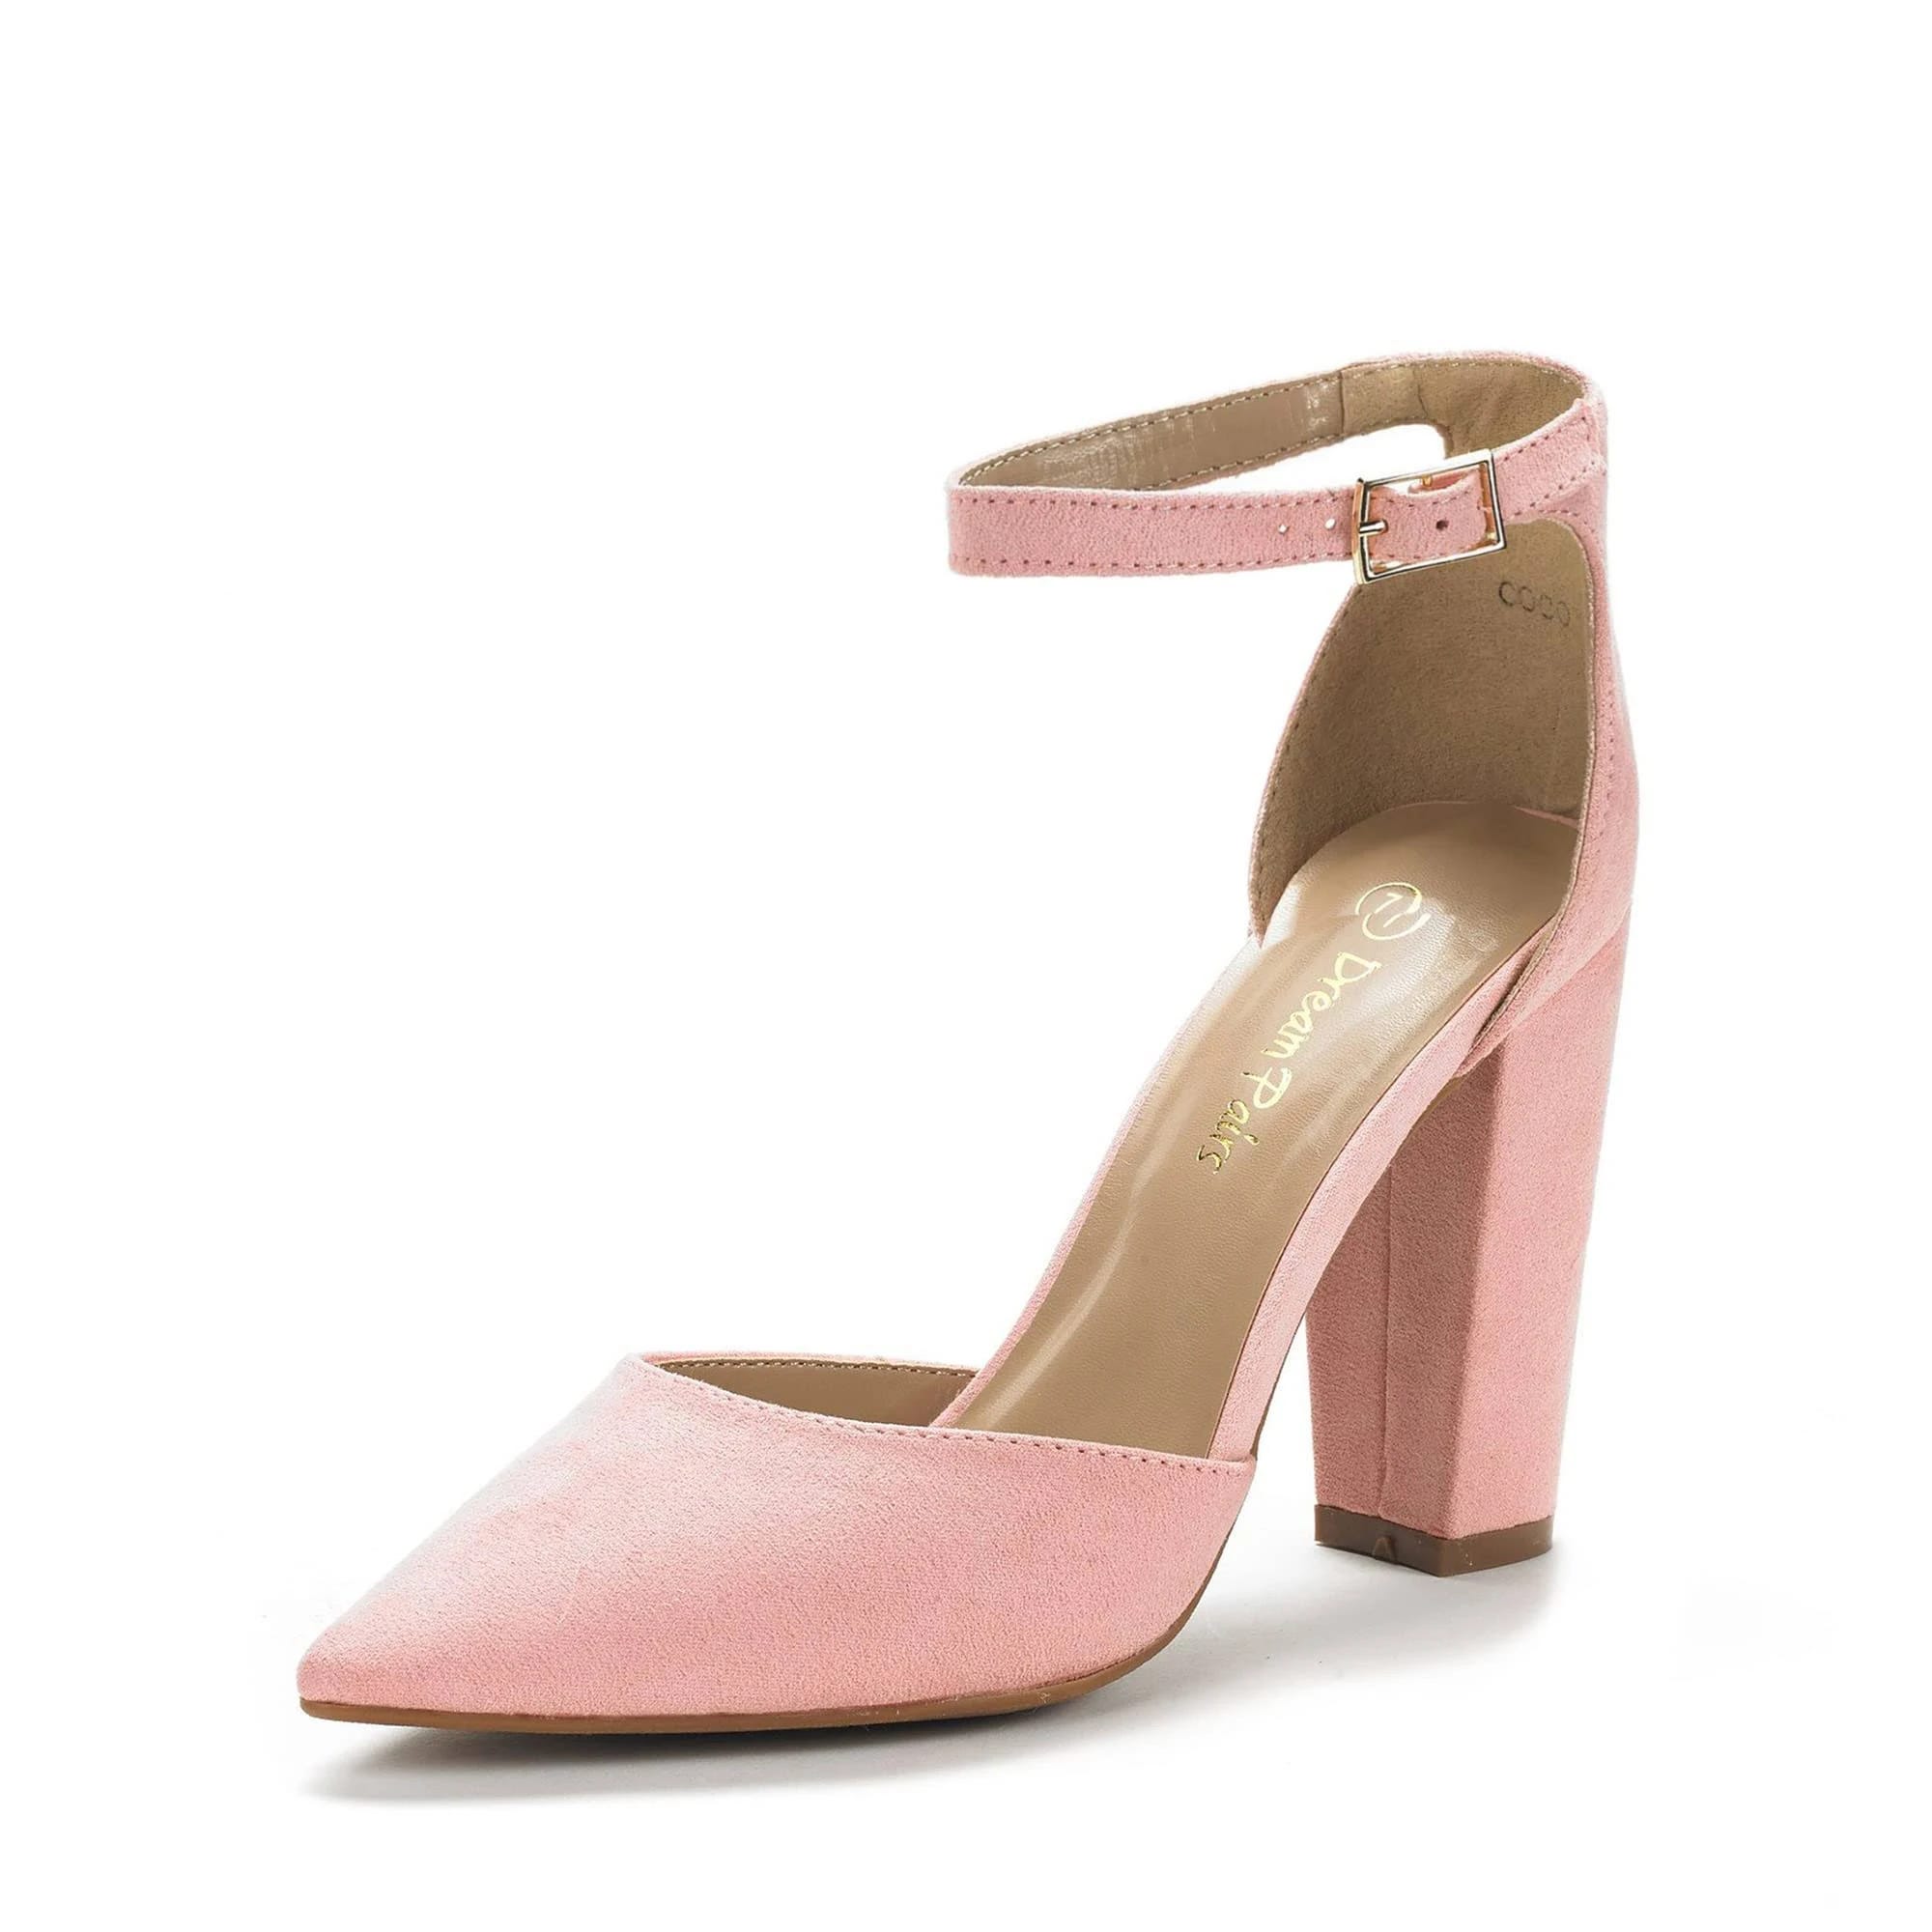 Fashionable Block Heel Pump with Adjustable Strap and Padded Insole | Image